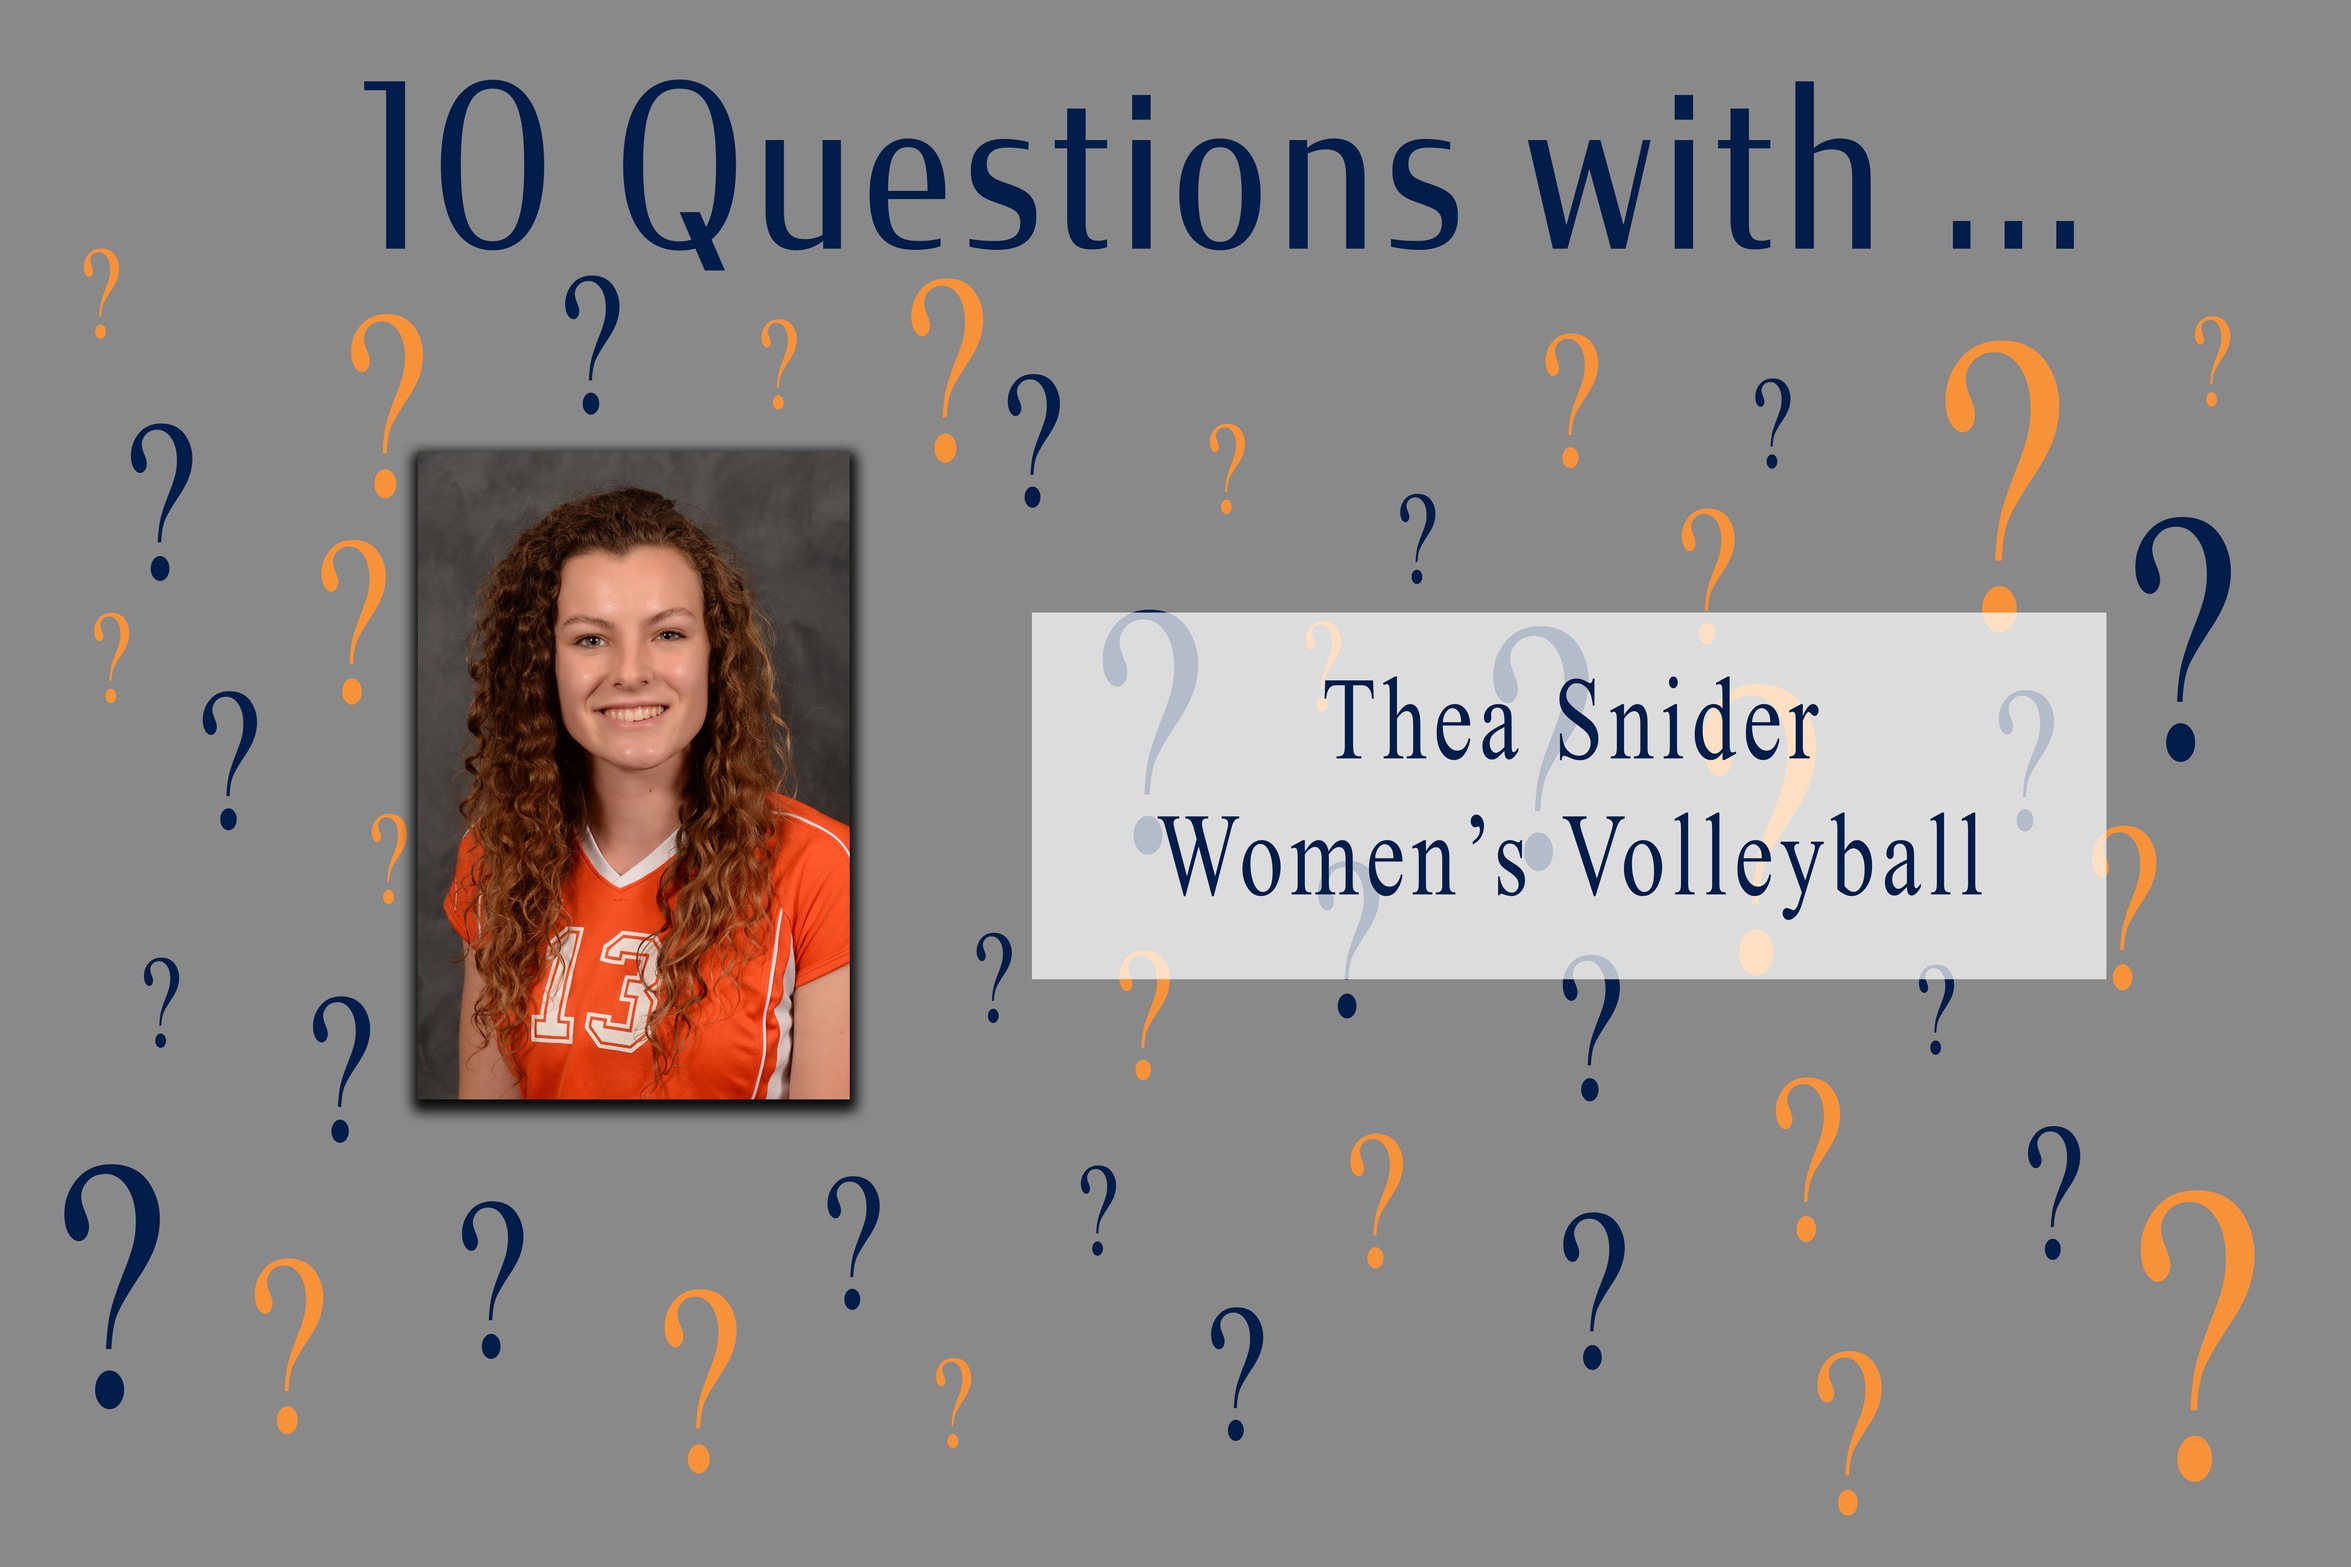 10 Questions With ... Thea Snider -- Women's Volleyball